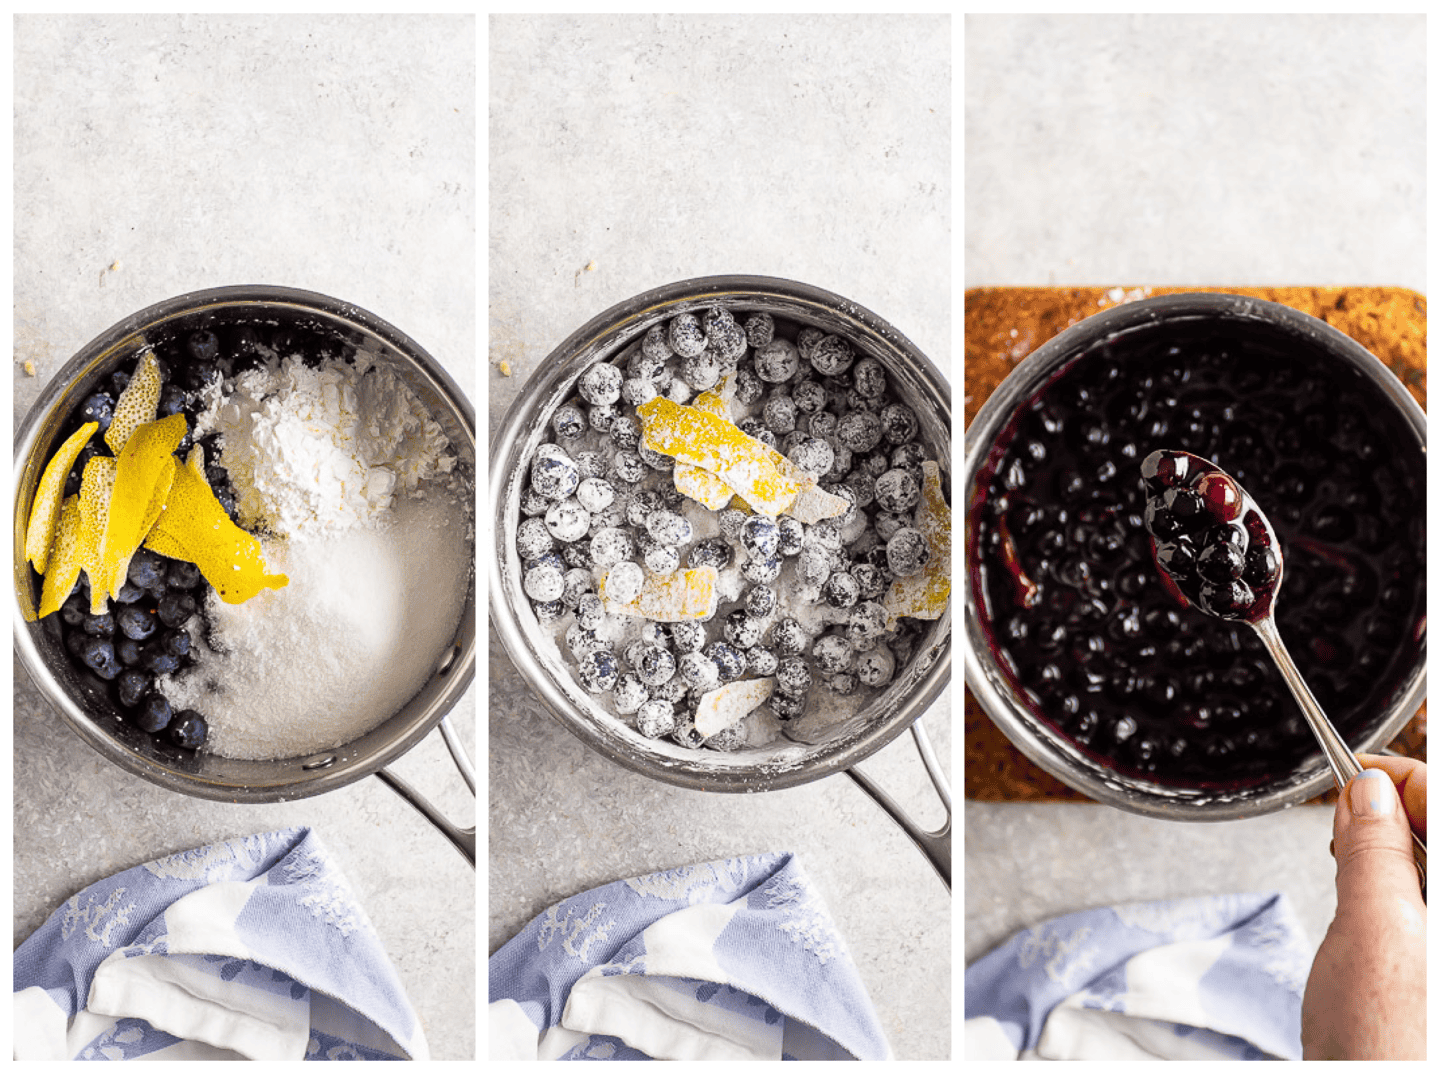 Image collage showing the steps to make blueberry filling.